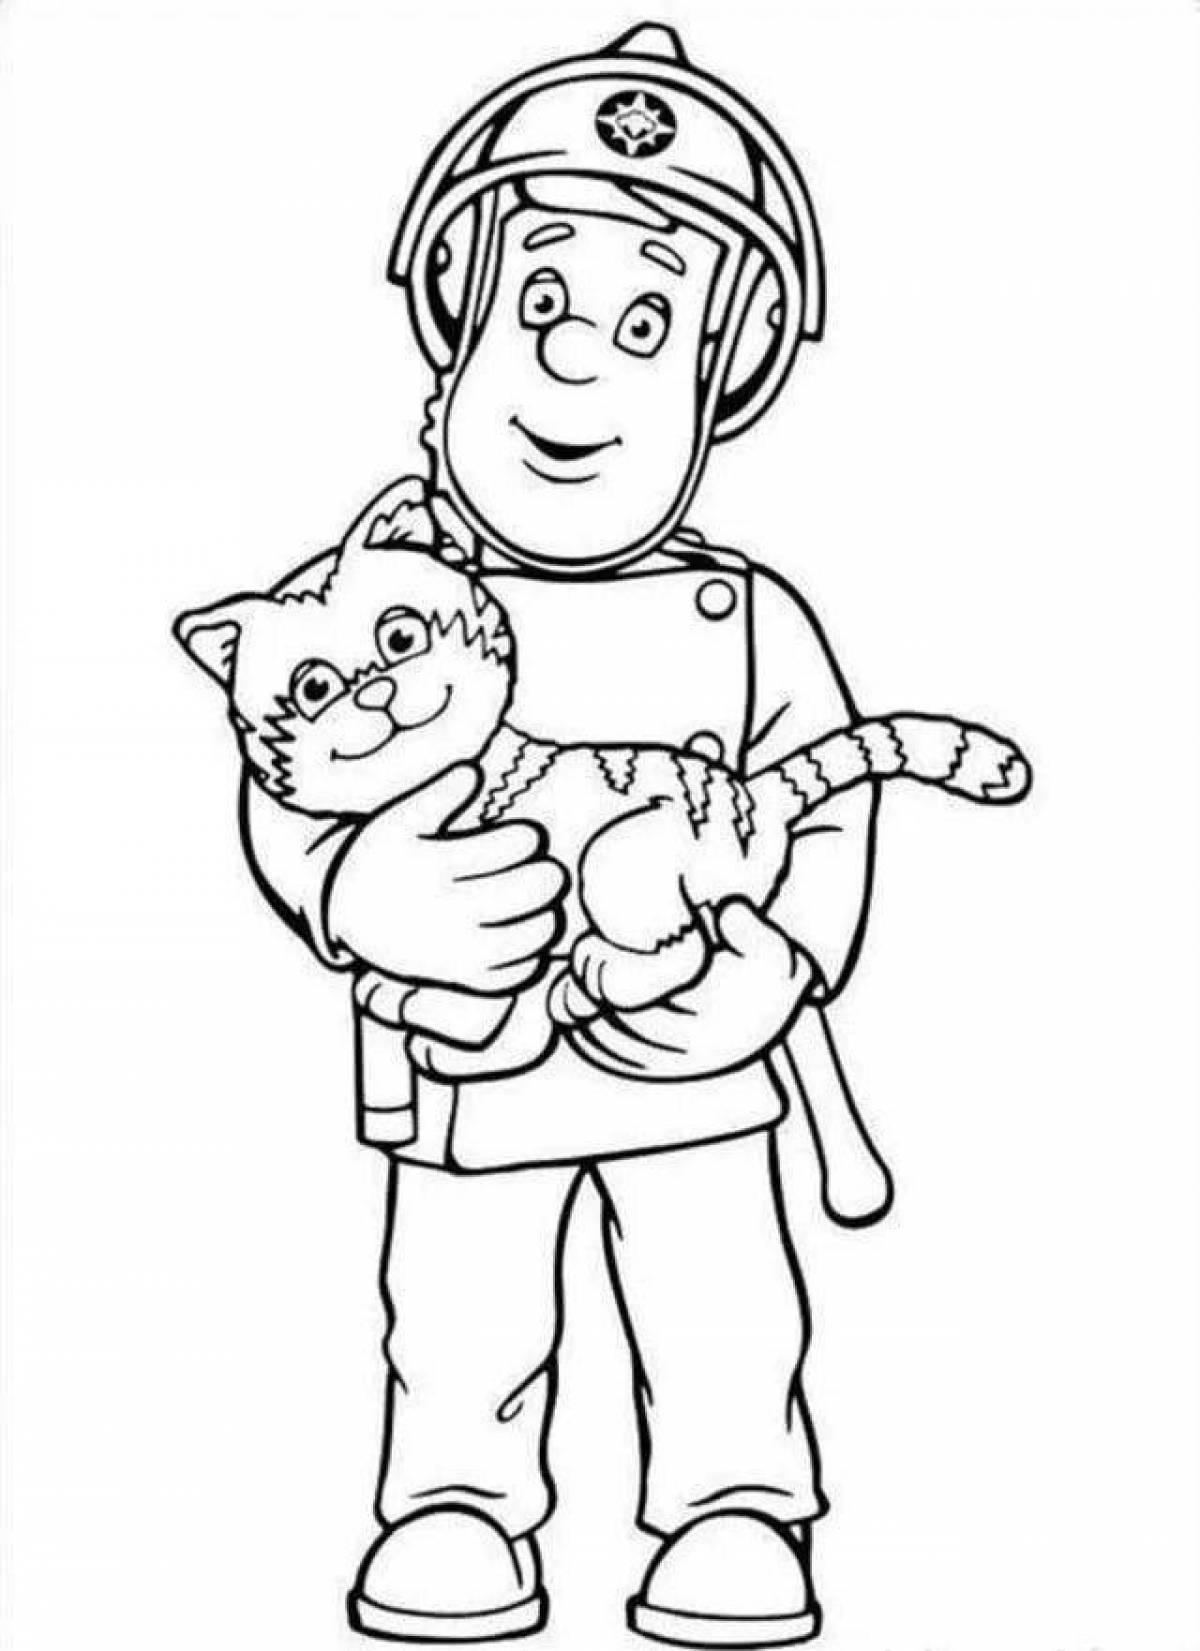 Dynamic Rescuers coloring page